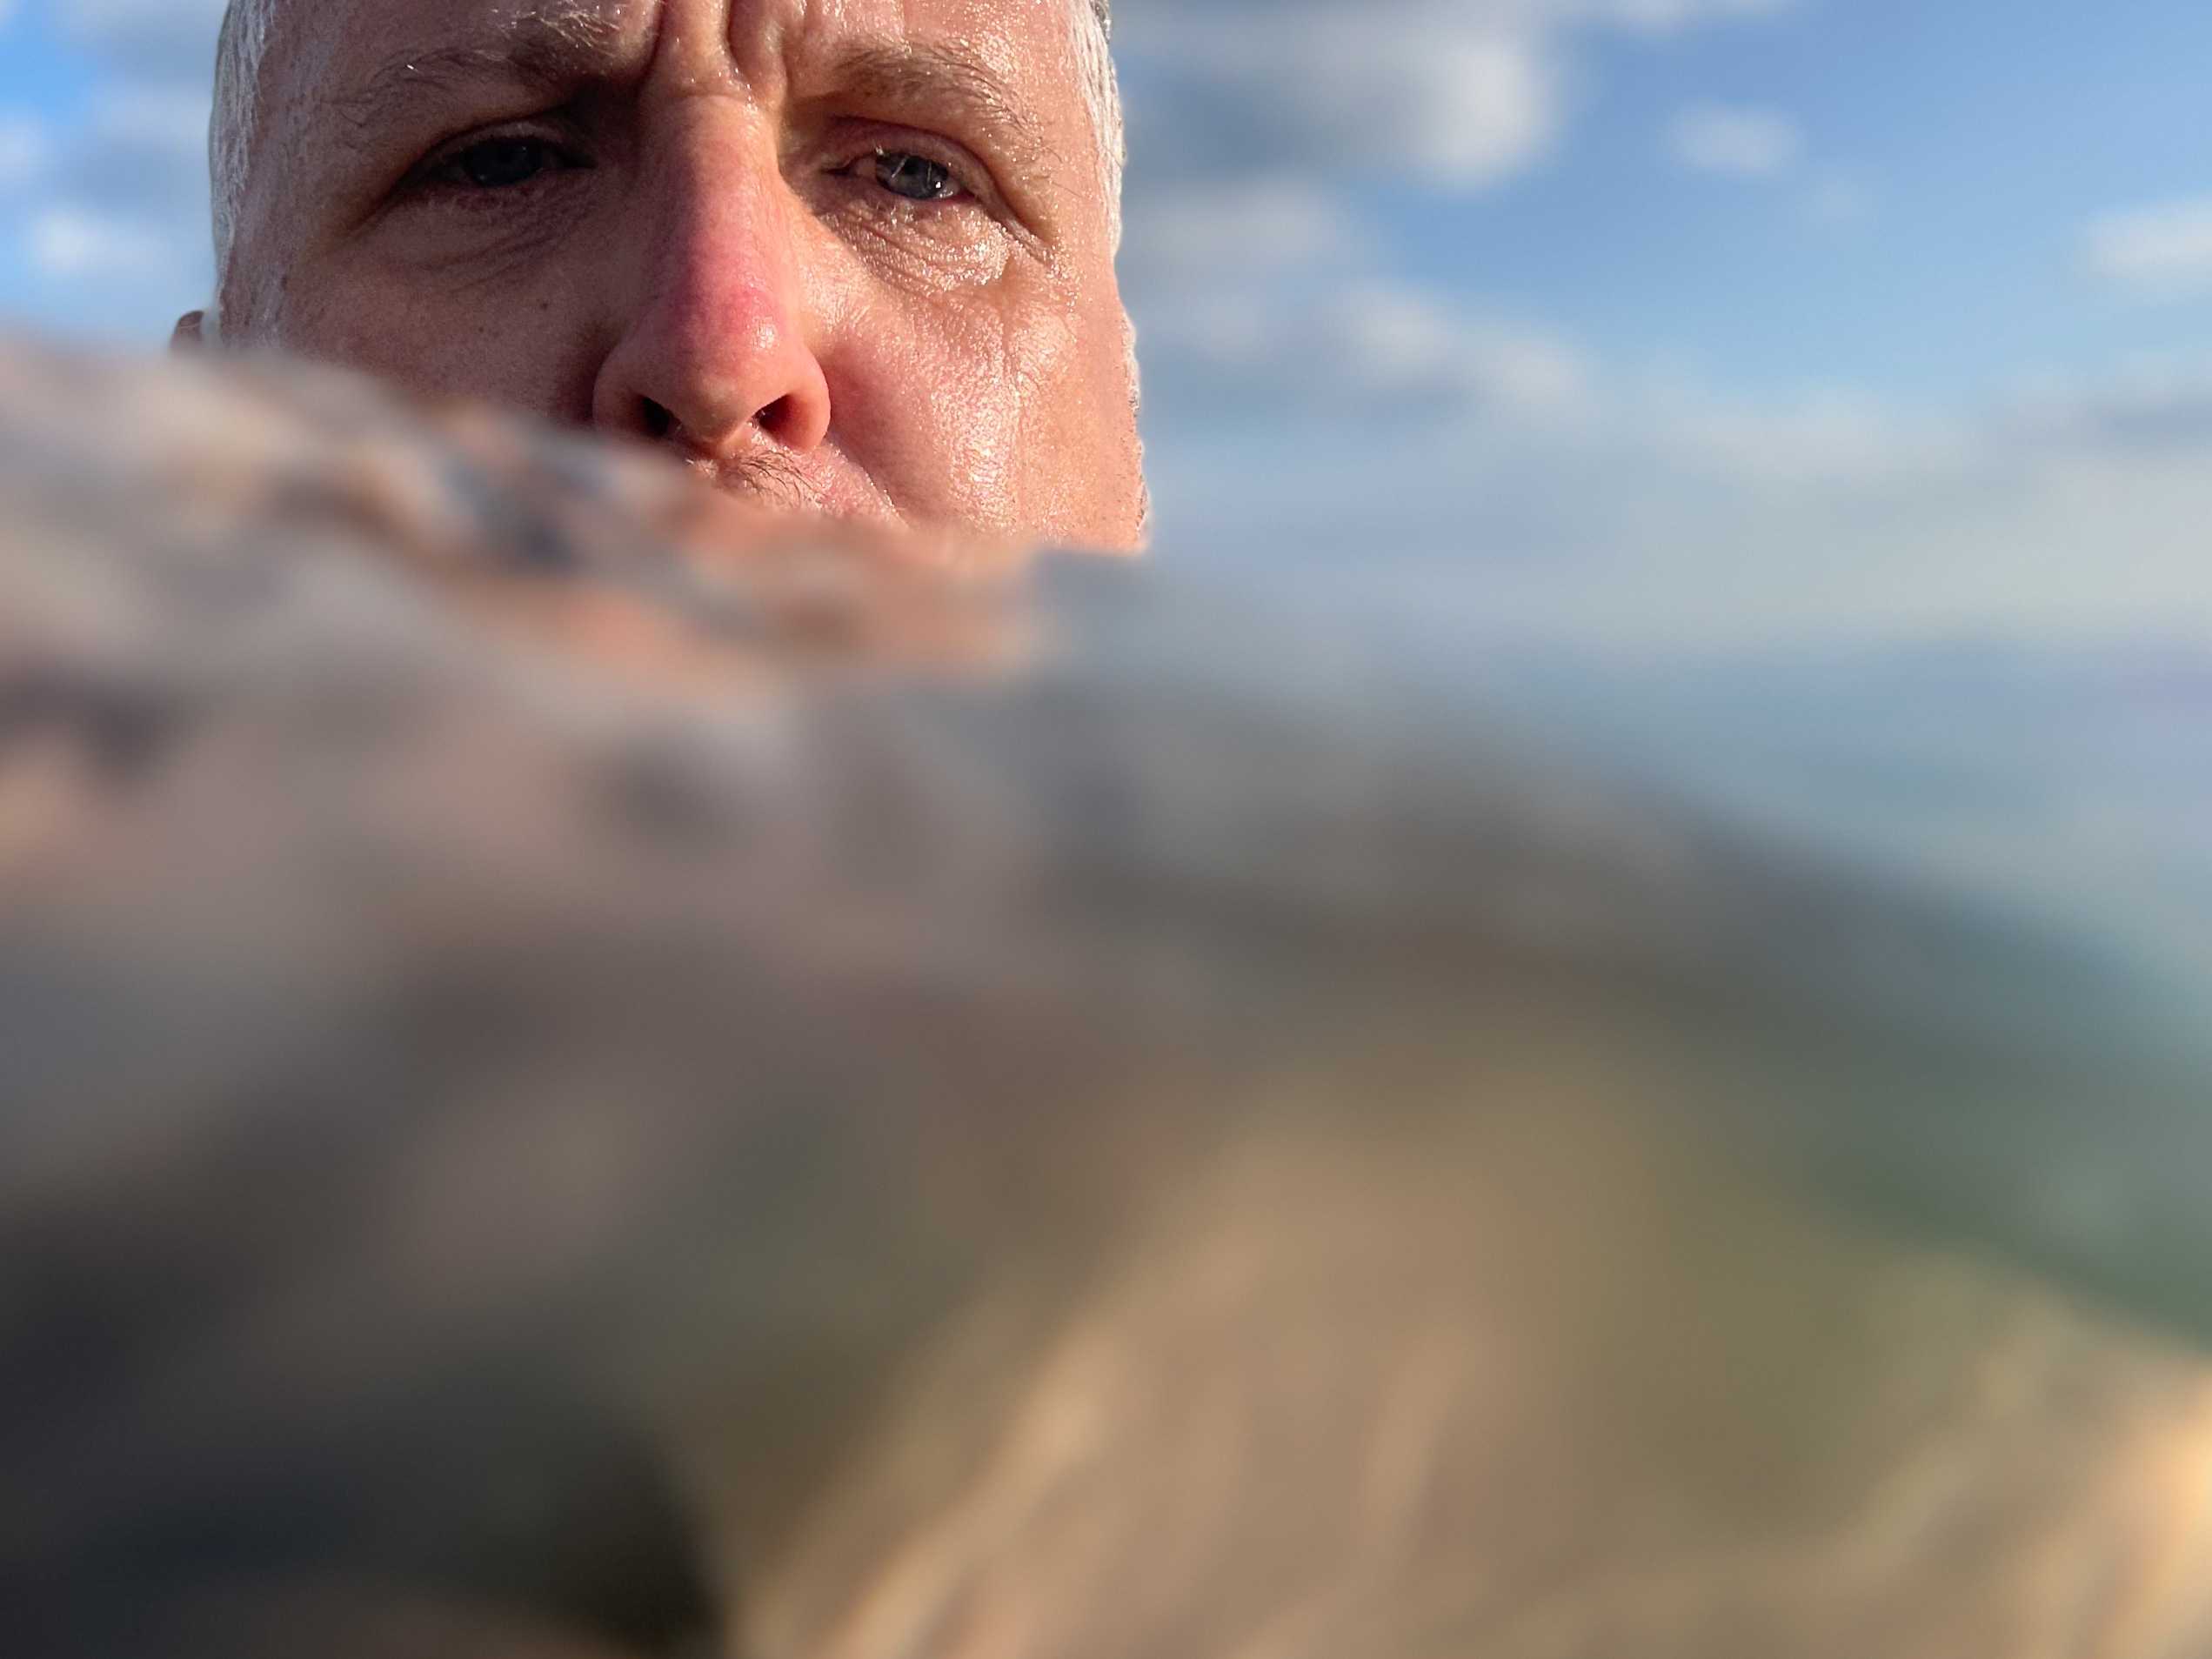 The water/sea fills two thirds of the frame, my head appears over a wave in the top left of the frame, backed by blue sky